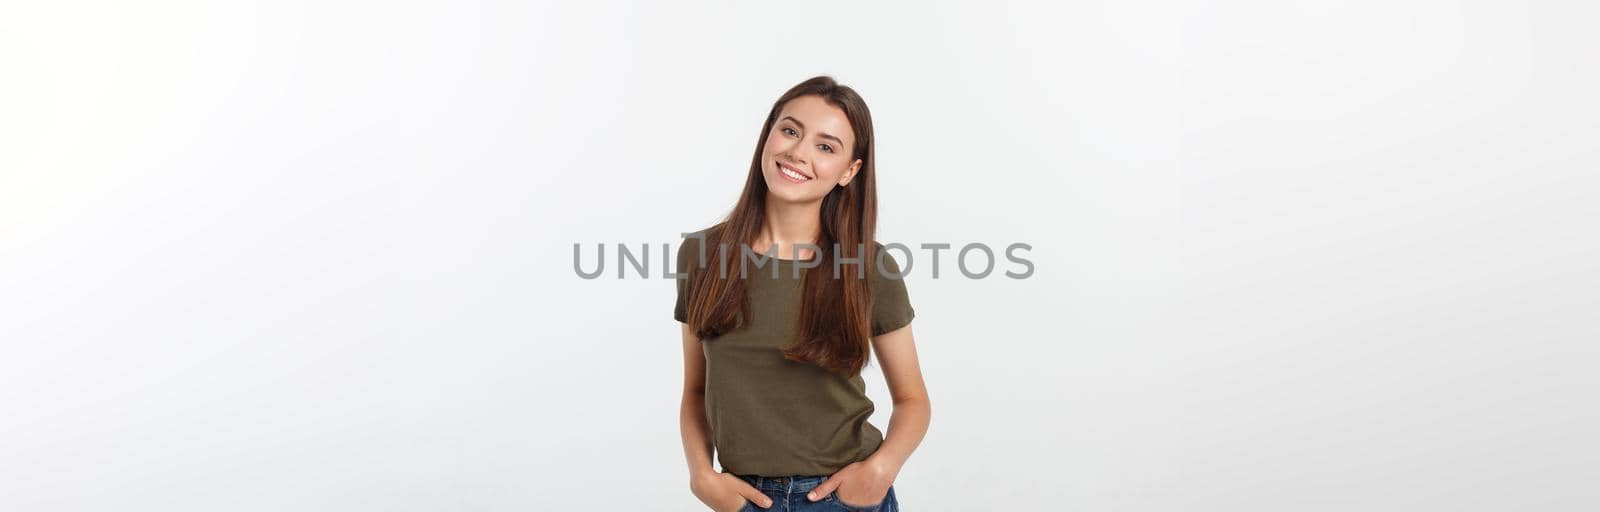 Close-up portrait of yong woman casual portrait in positive view, big smile, beautiful model posing in studio over white background